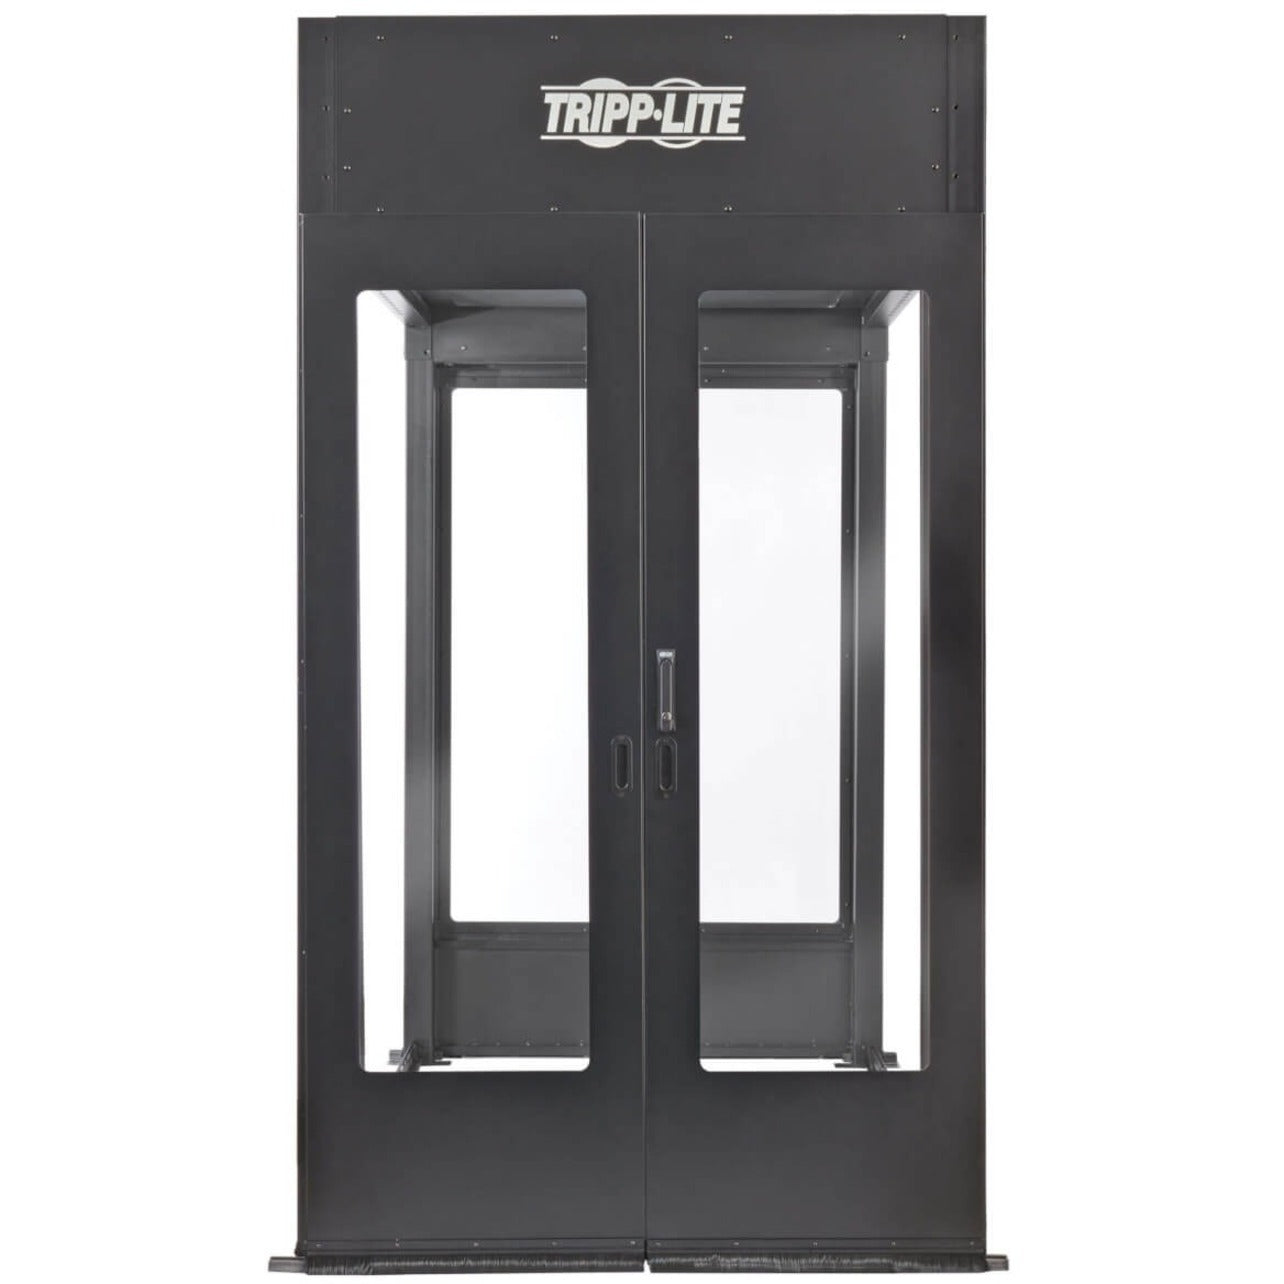 Tripp Lite SRCTMTSDD Sliding Double-Door Kit for Hot/Cold Aisle Containment System, 5 Year Warranty, Easy Installation